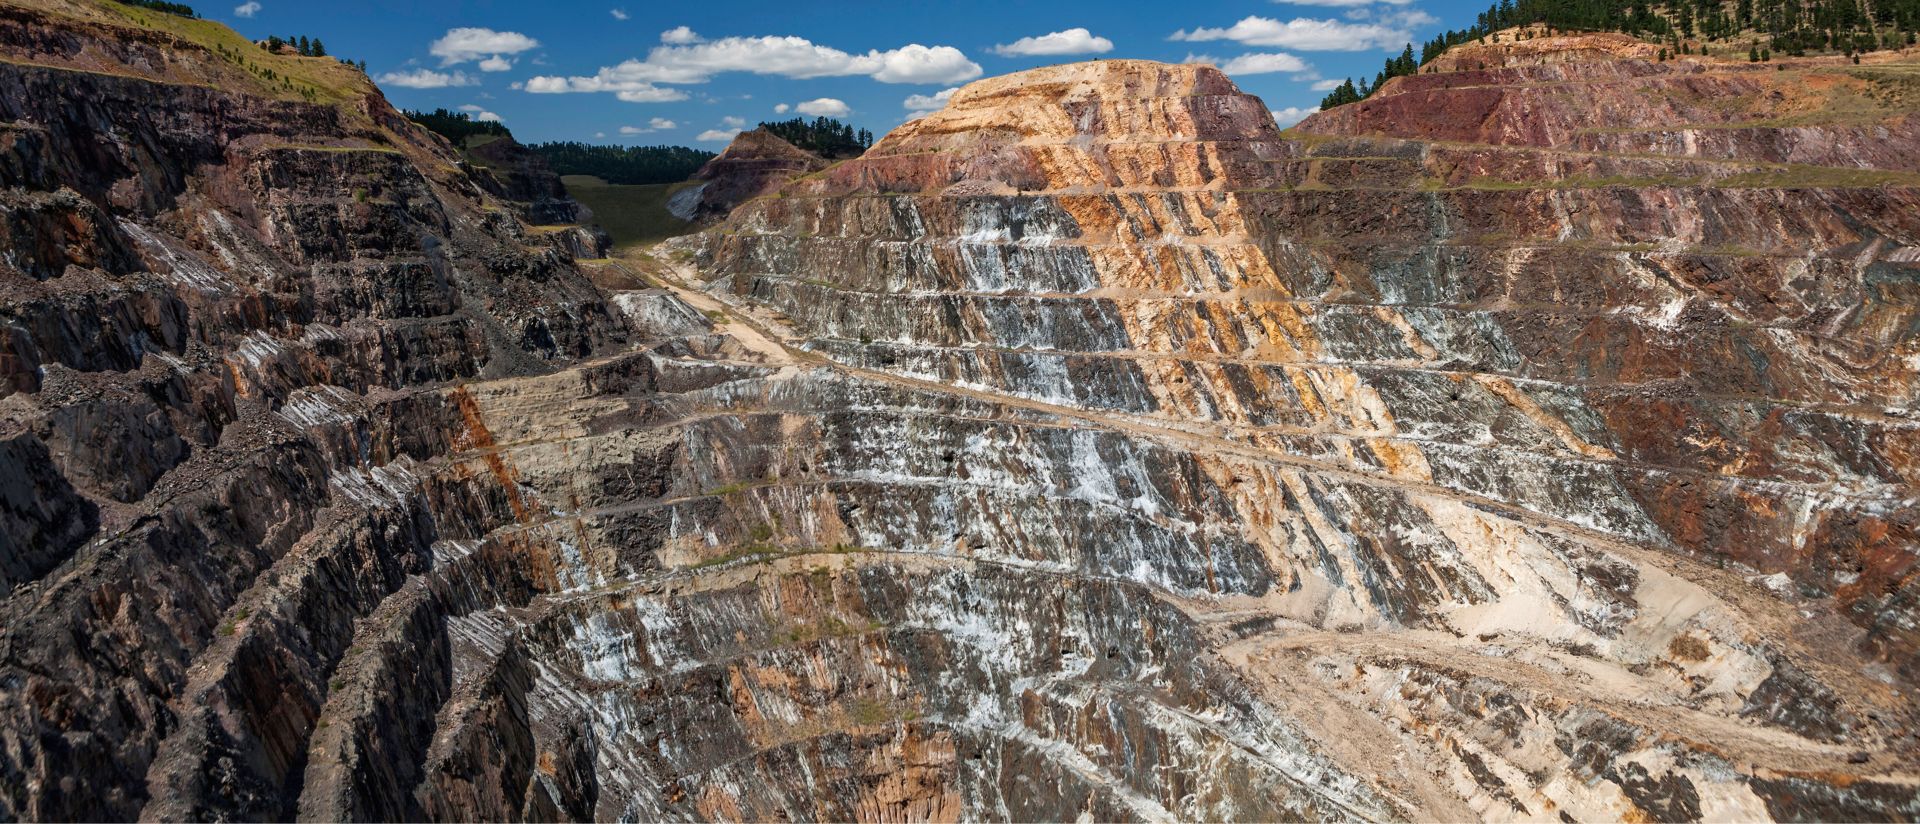 View of open pit